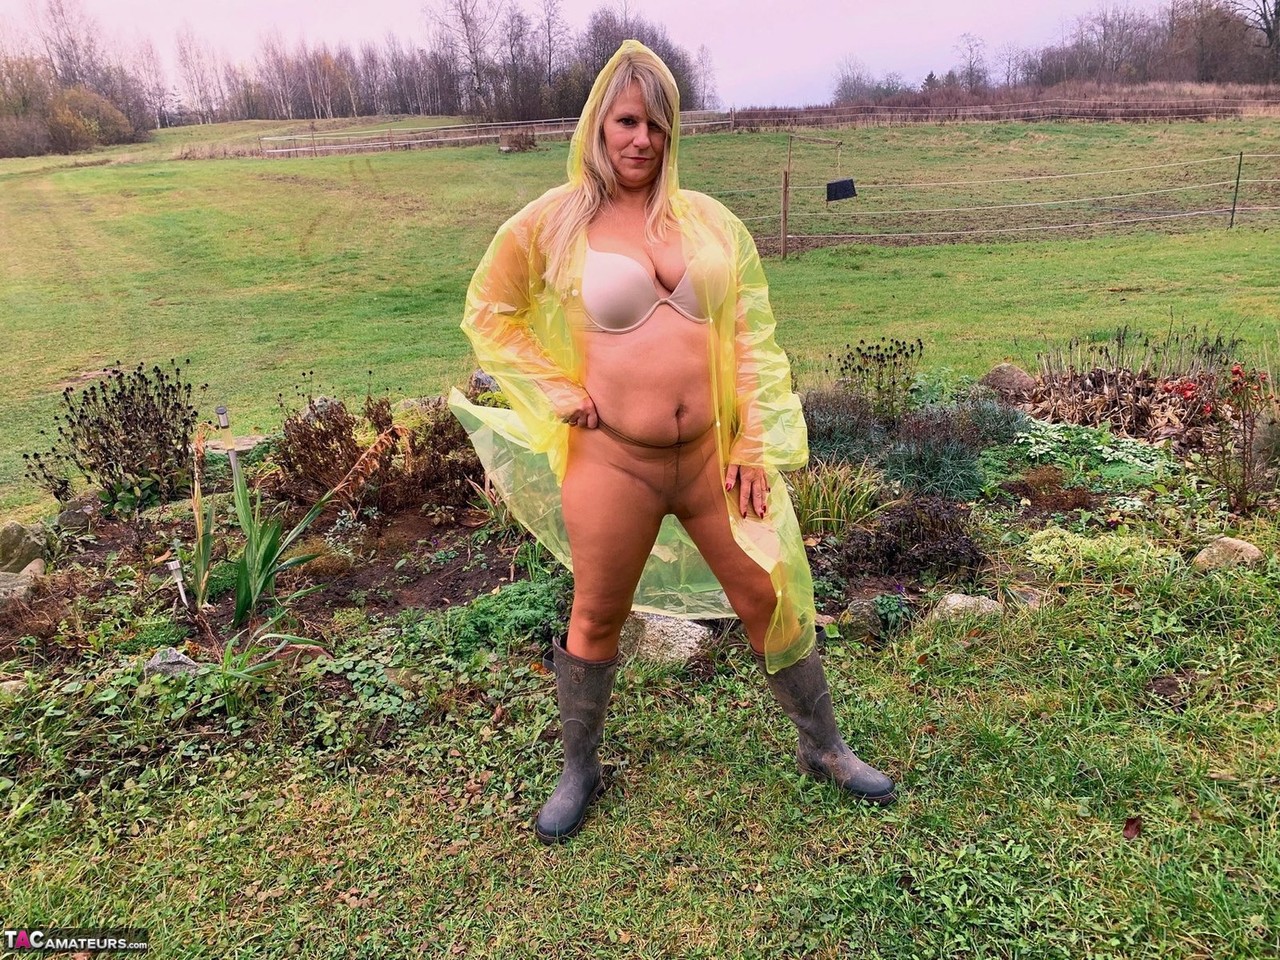 Overweight amateur Sweet Susi shows her naked body while wearing rubber boots foto pornográfica #424944060 | TAC Amateurs Pics, Sweet Susi, BBW, pornografia móvel